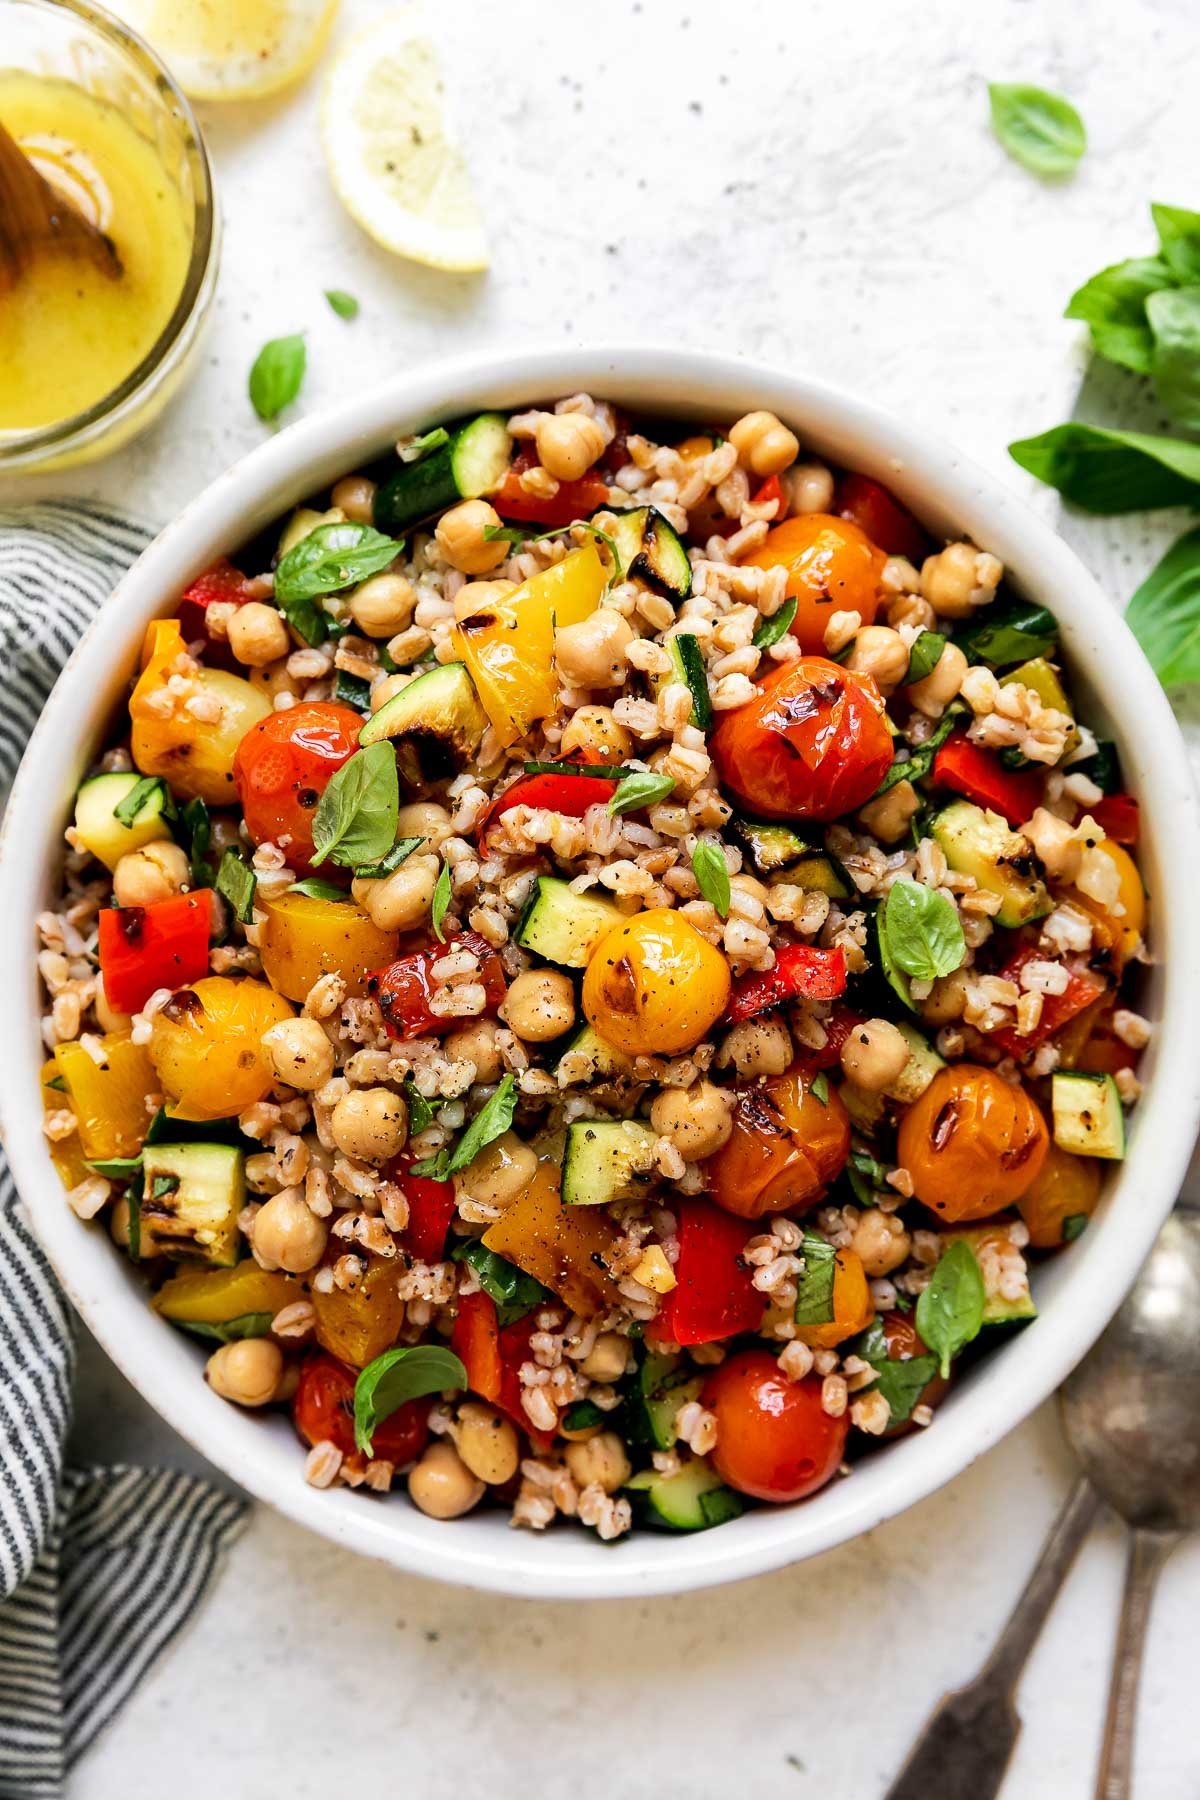 https://playswellwithbutter.com/wp-content/uploads/2022/07/Summer-Farro-Salad-with-Grilled-Veggies-Burst-Tomatoes-10.jpg